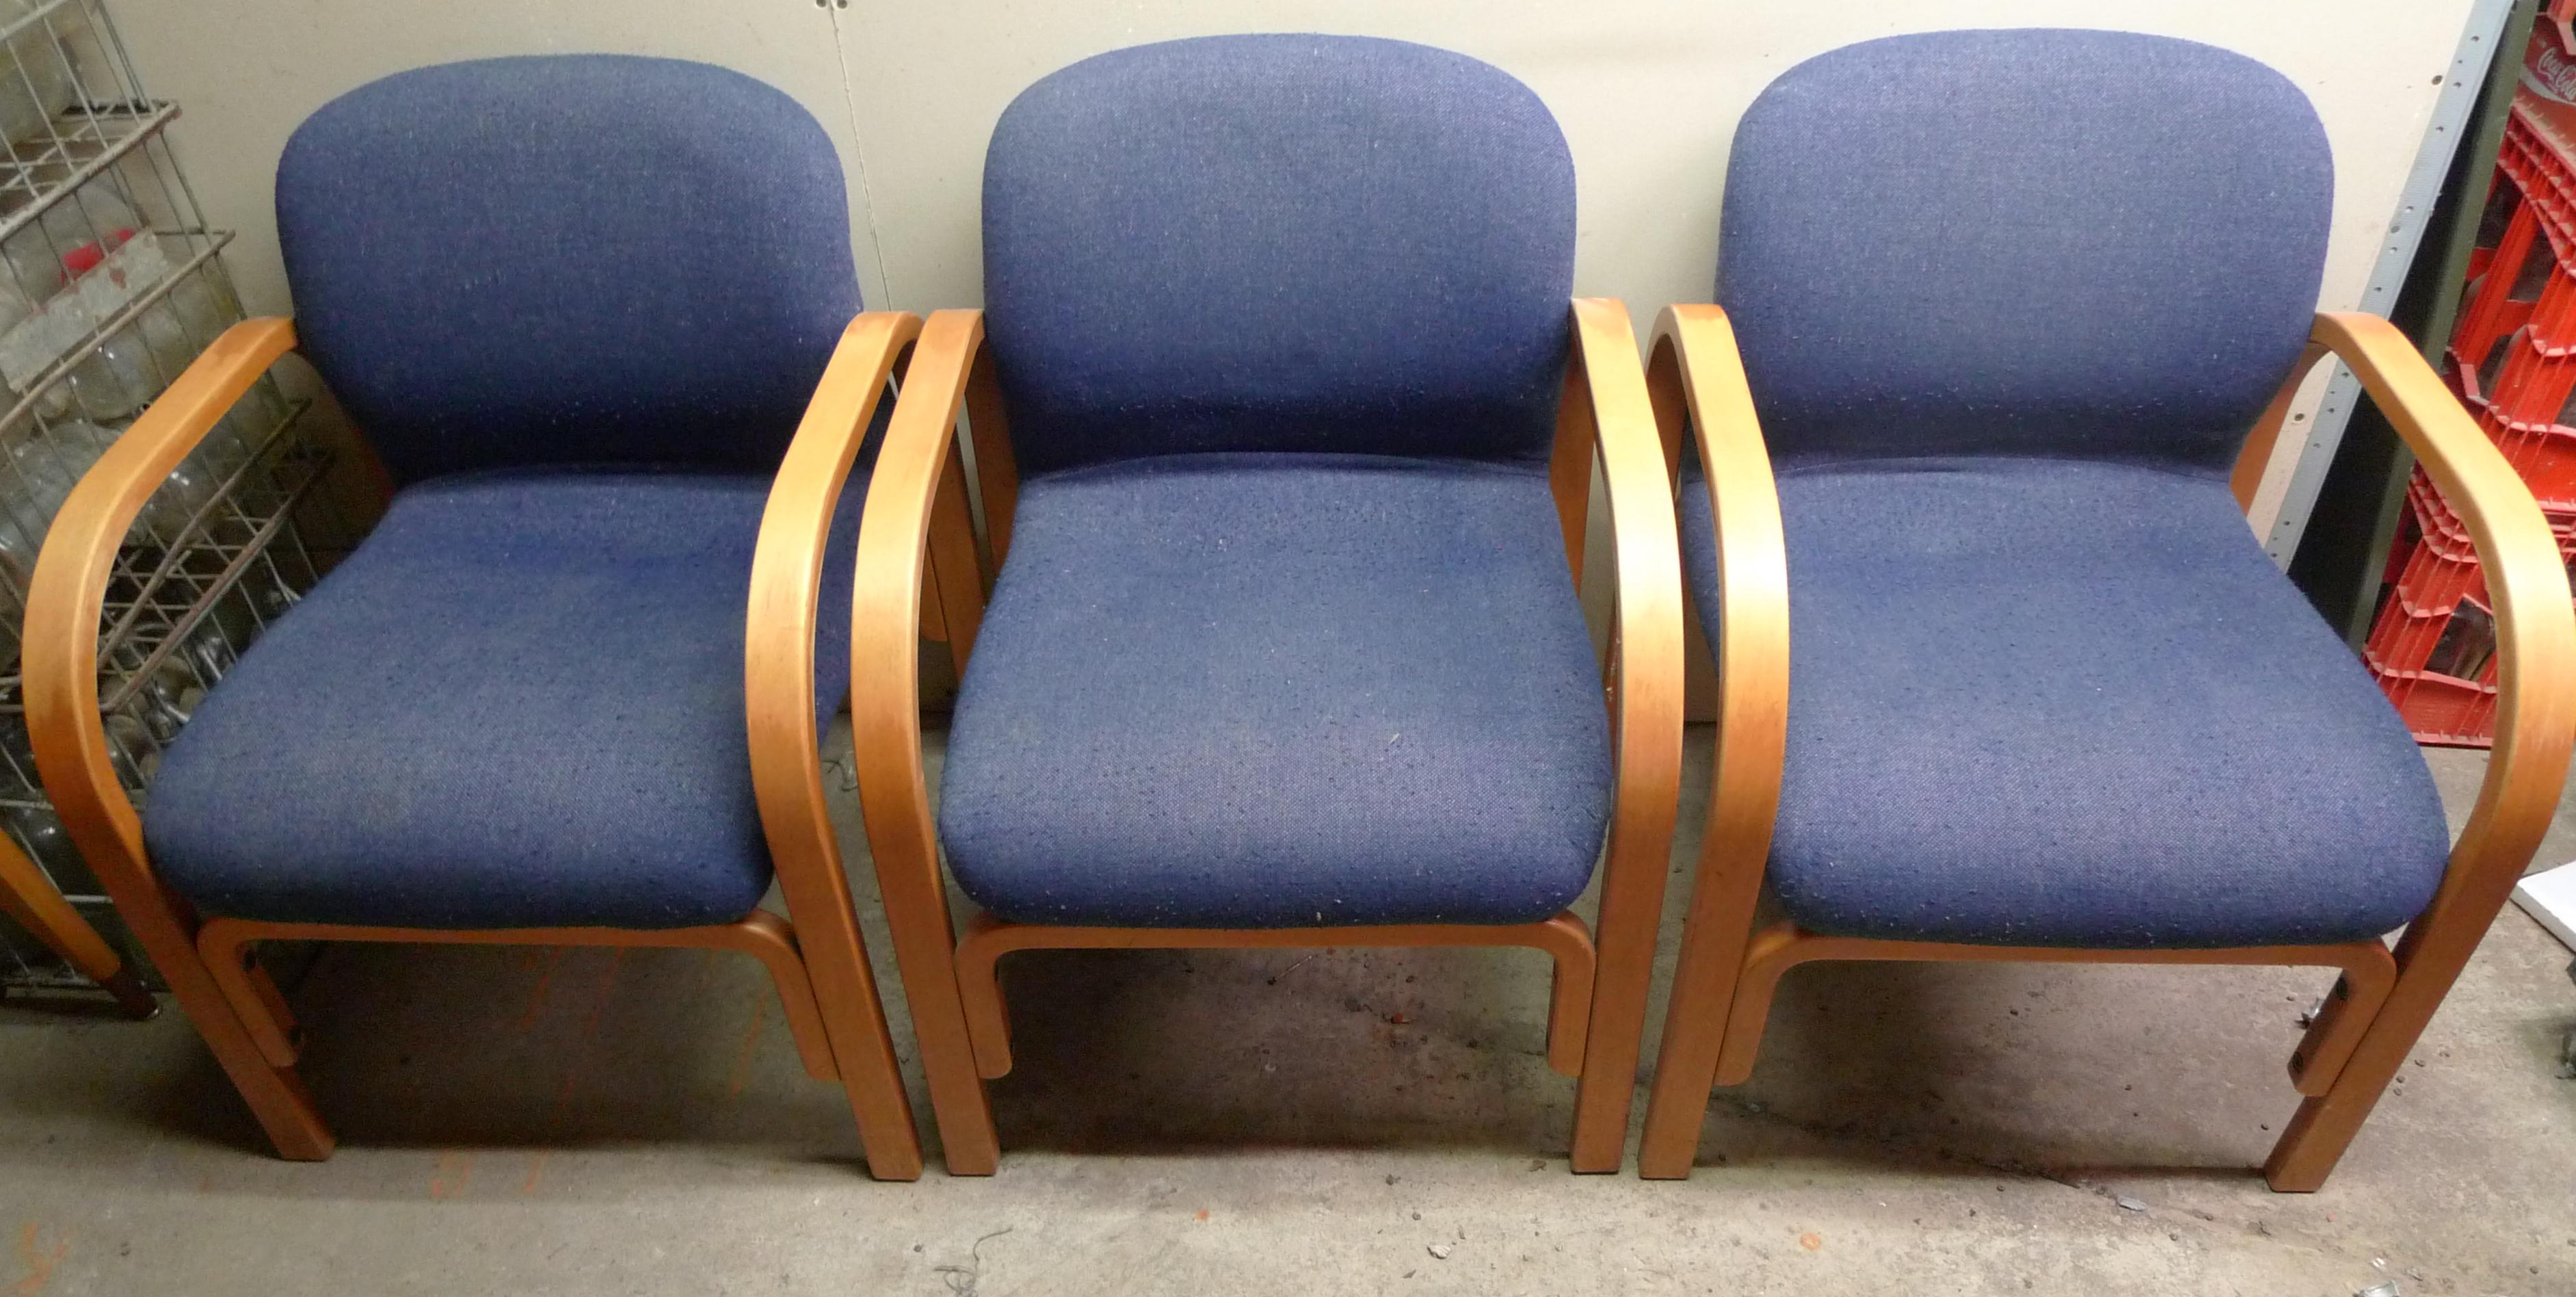 Mid-Century Modern Midcentury Chairs Upholstered in Nubbly Fabric on Hardwood Frames, Set of 3 For Sale